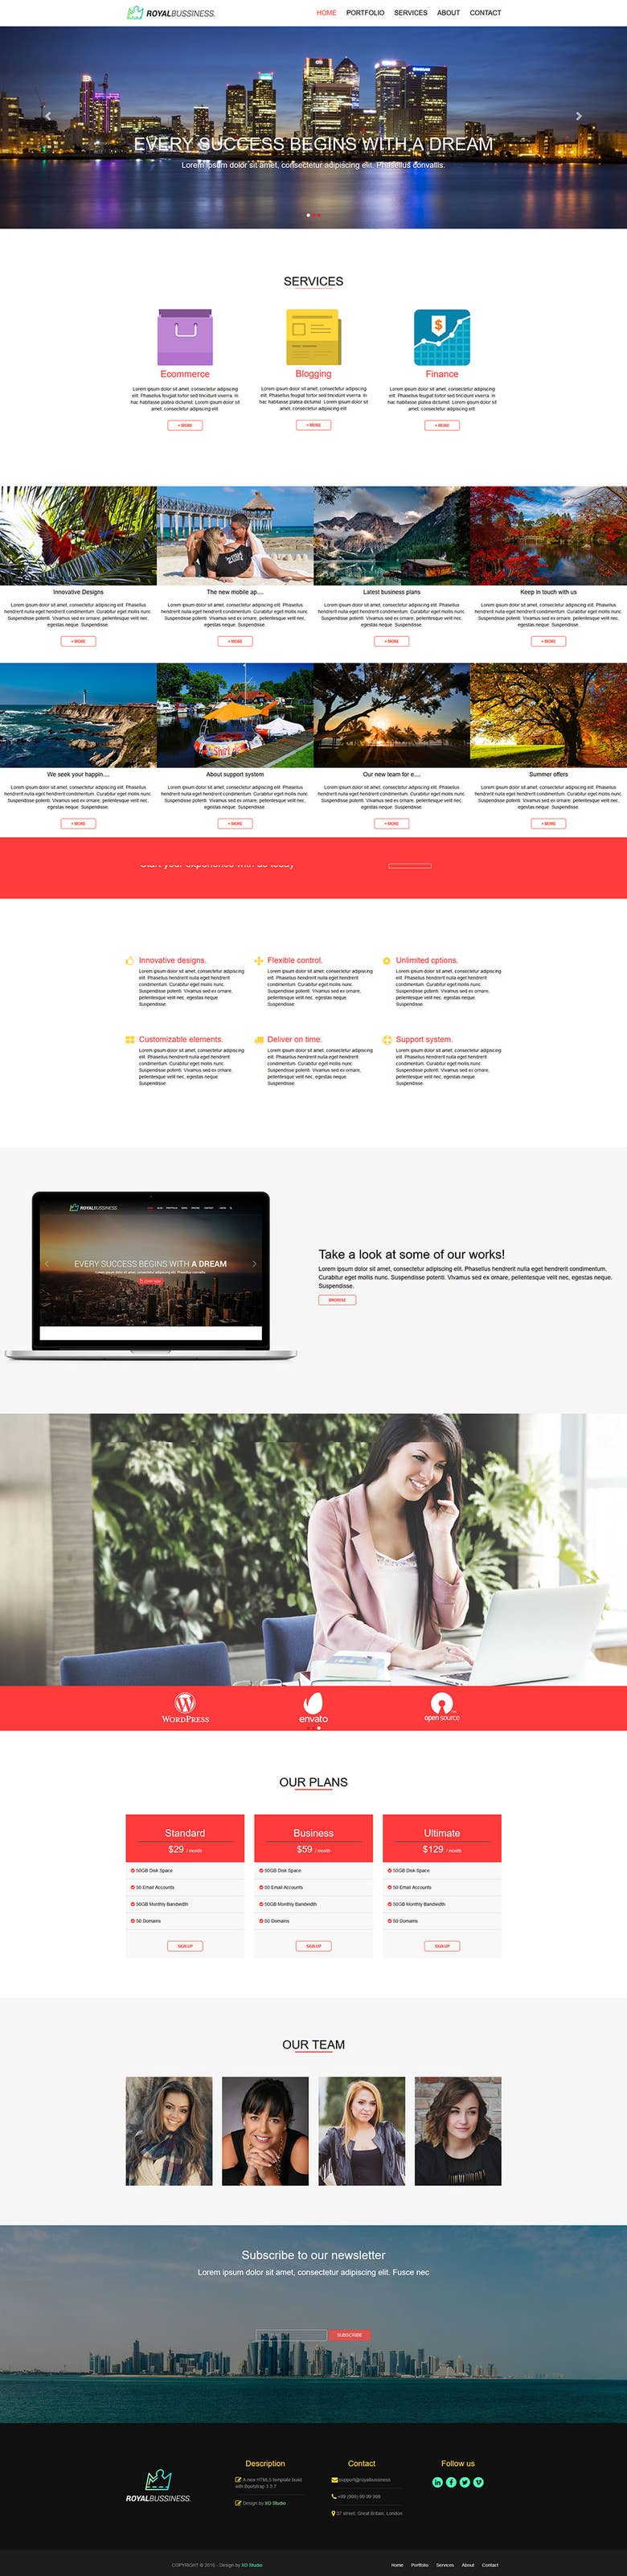 PSD to HTML - Royal Business HTML5 webpage